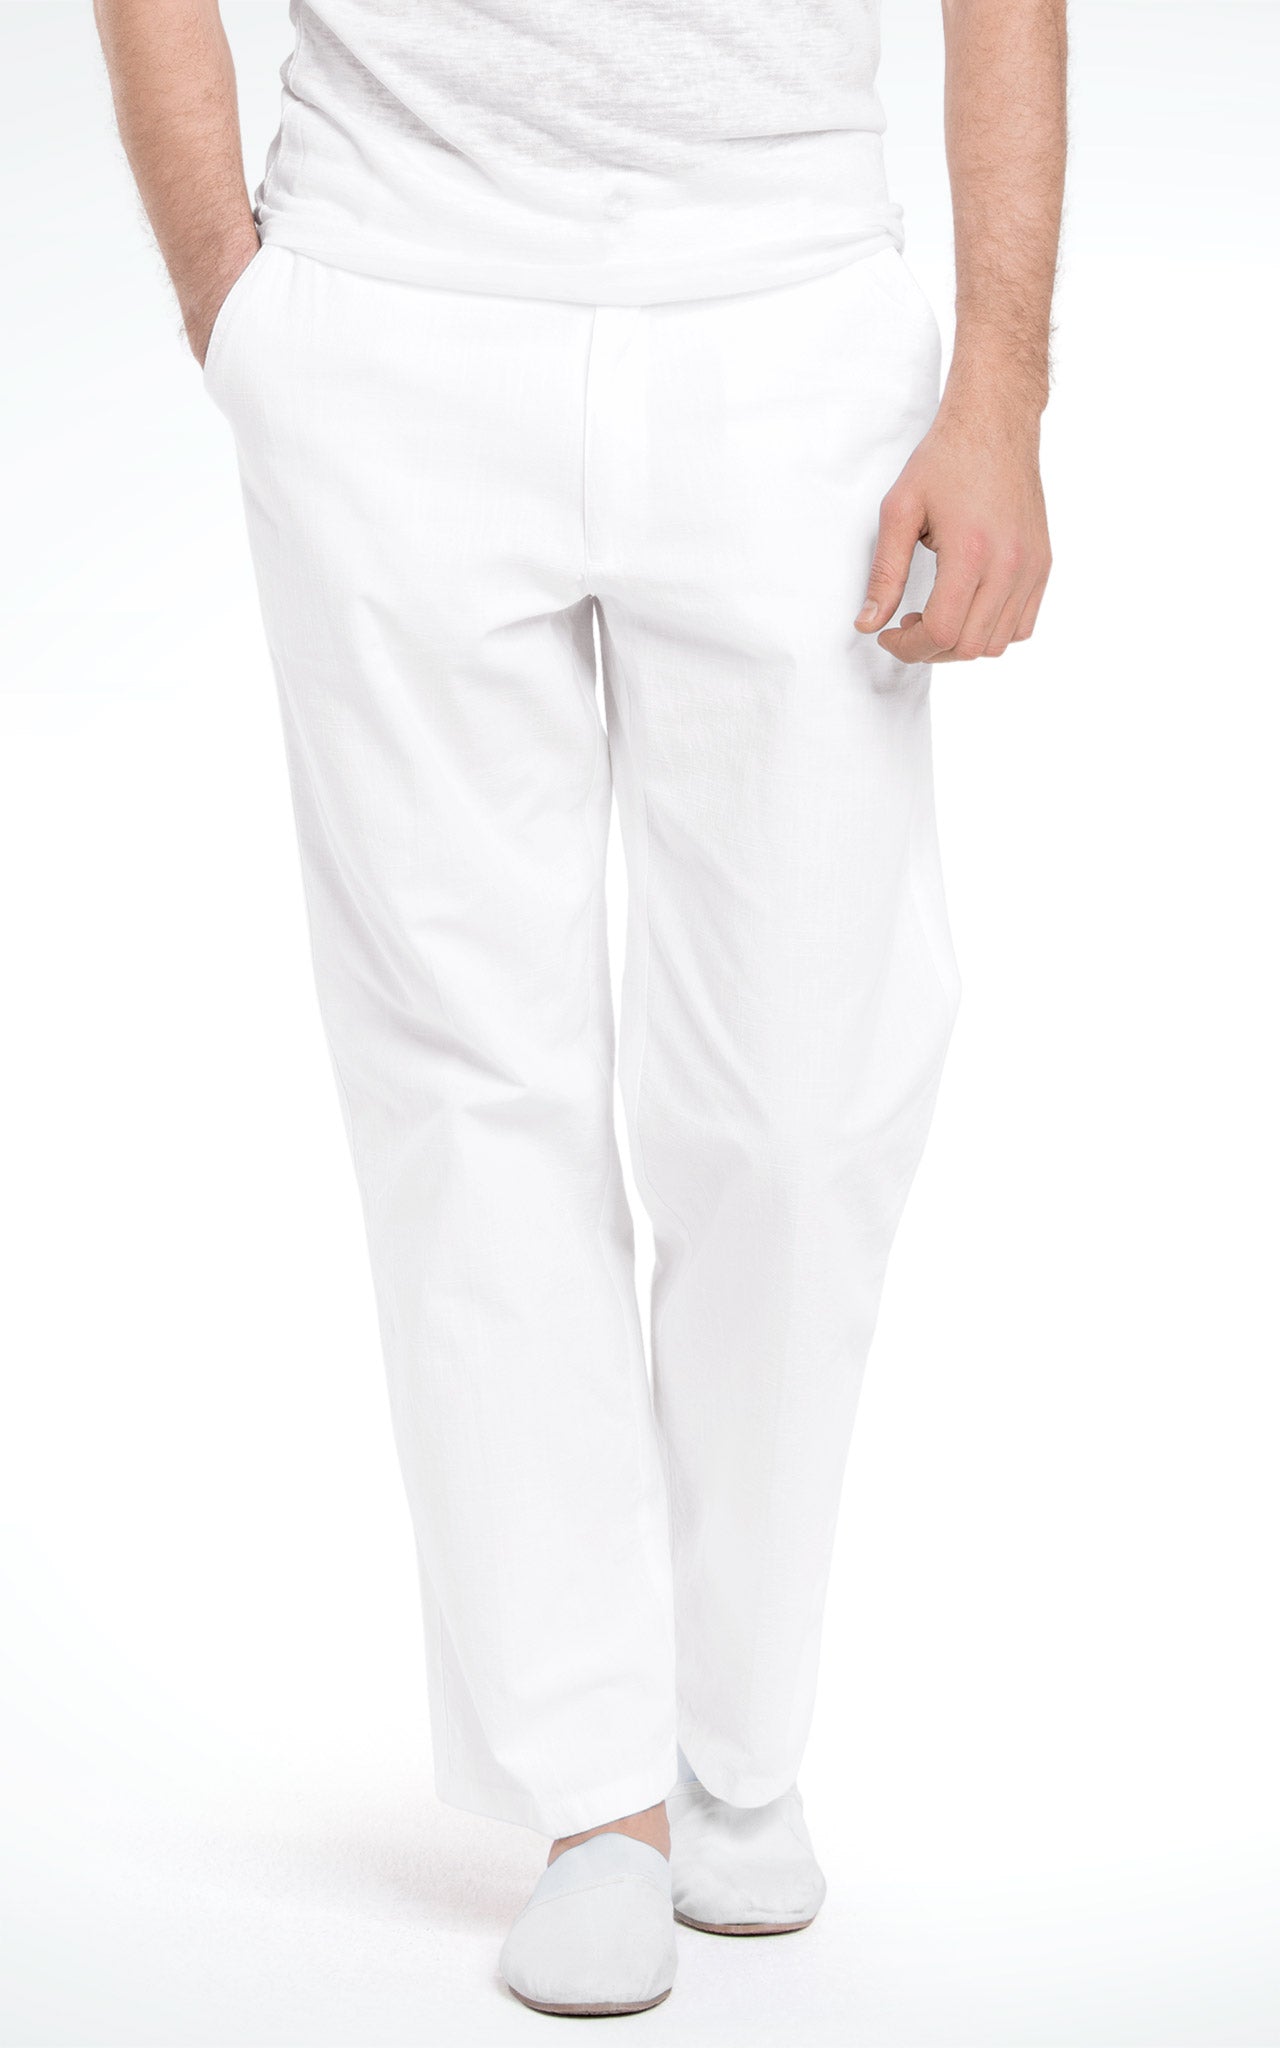 Men's Relaxed Casual Cotton Beach Pants